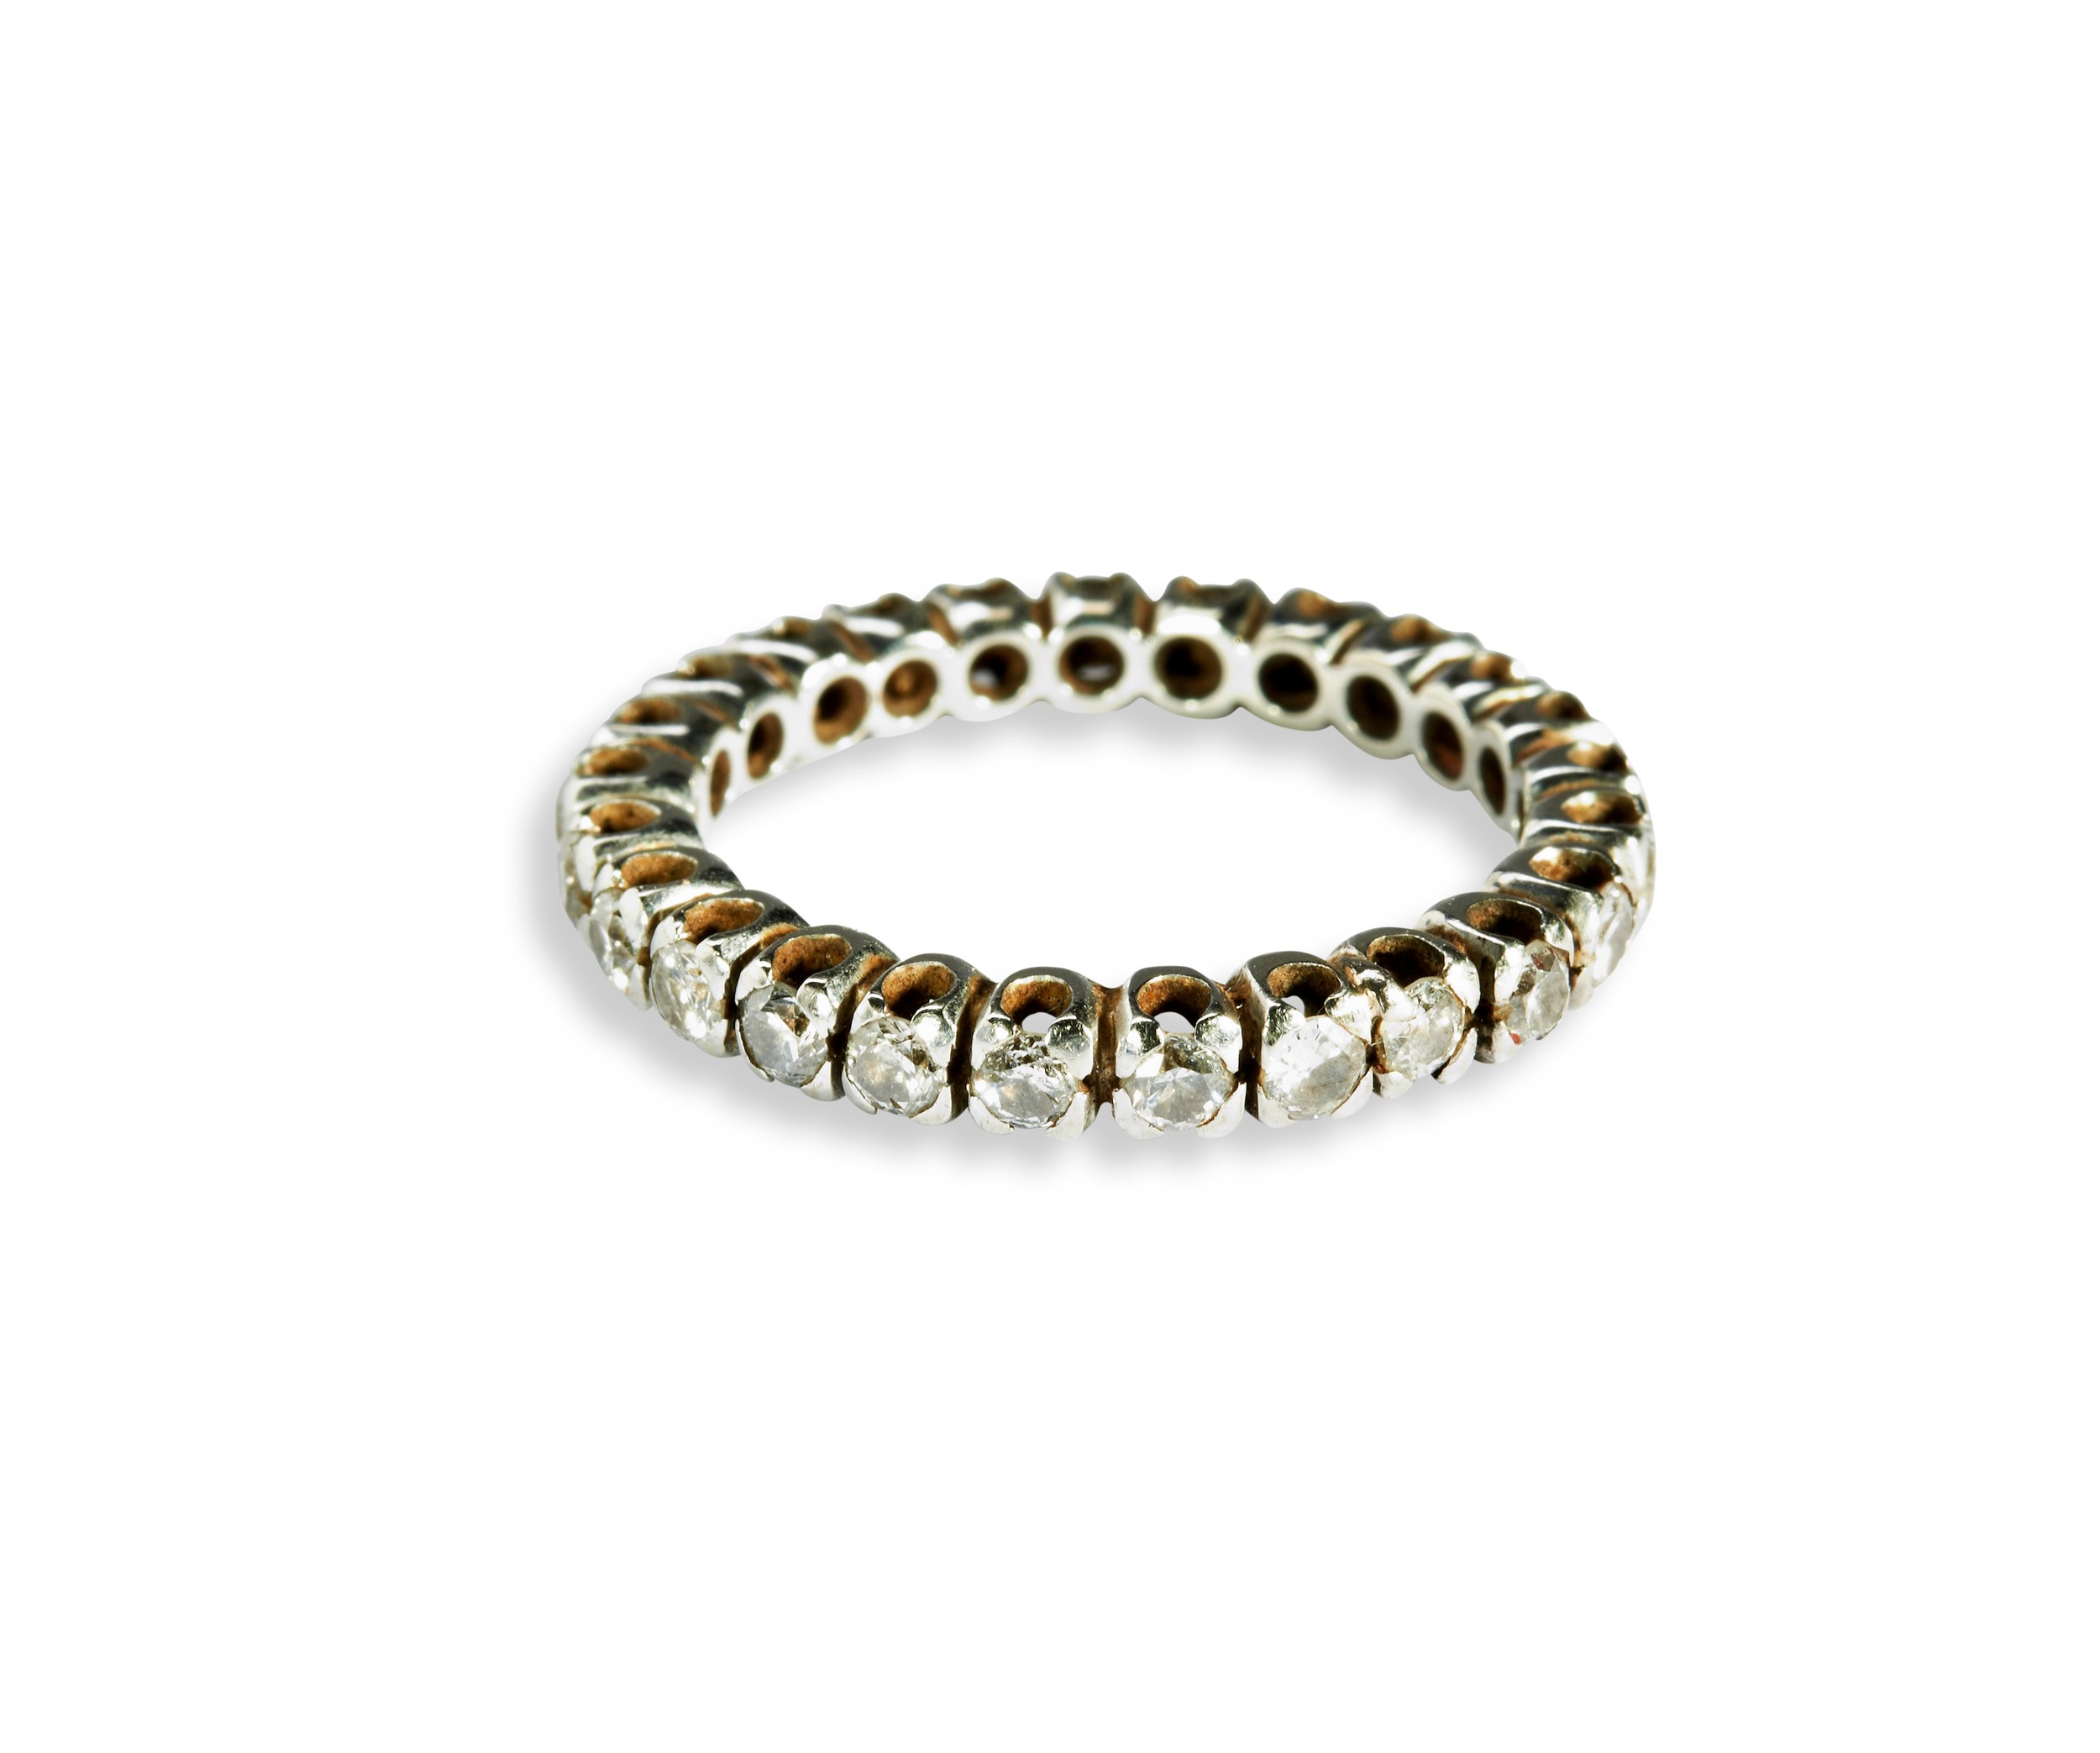 A FULL DIAMOND ETERNITY RING CIRCA 1970 Set in white gold with 25 brilliant-cut claw set diamonds. - Image 2 of 2